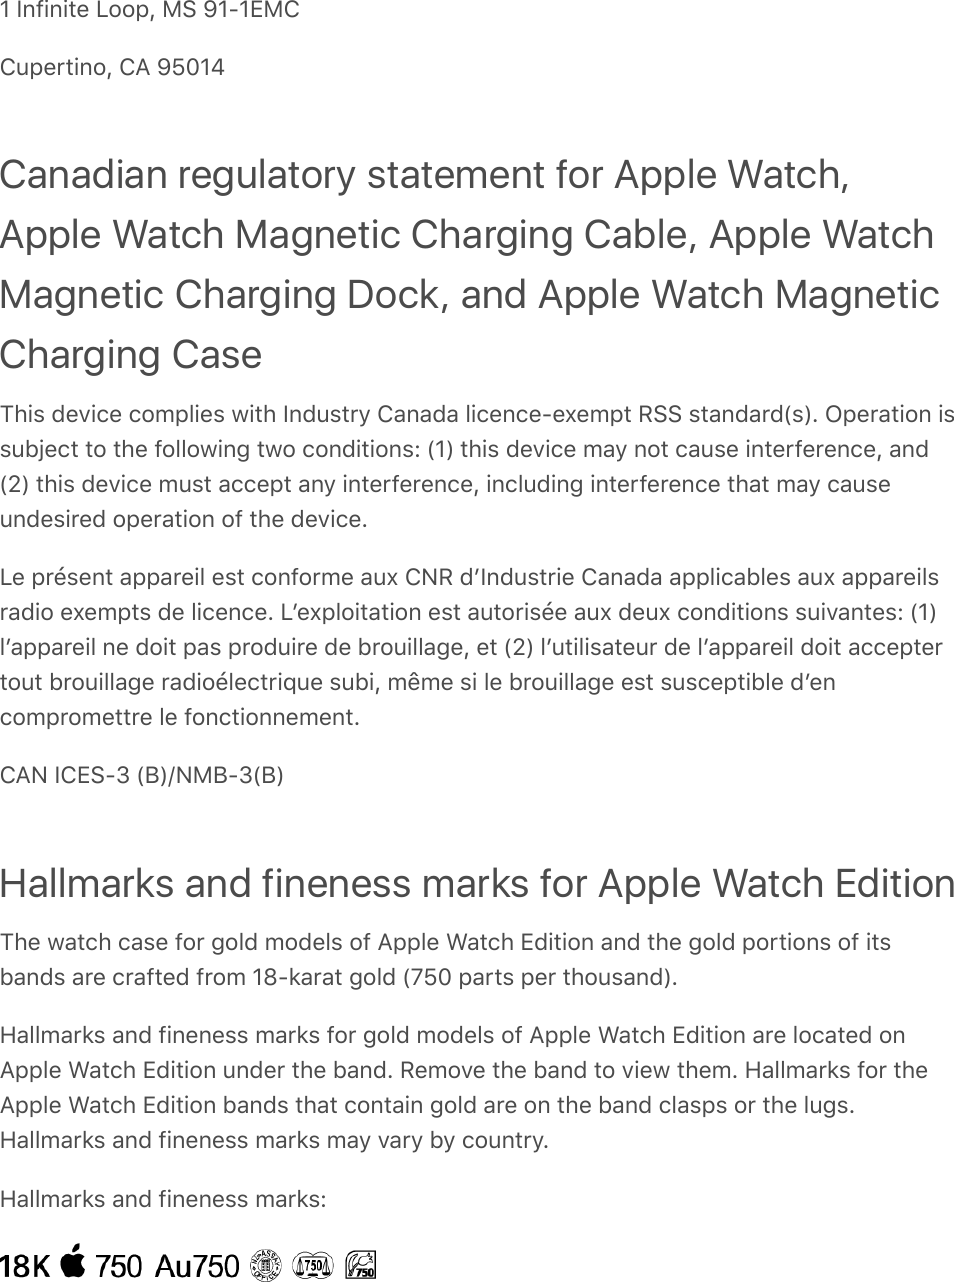 X&amp;],=+,+/%&amp;B##CI&amp;J.&amp;qXAXhJ!!2C%*/+,#I&amp;!9&amp;qZYXNCanadian regulatory statement for Apple Watch,Apple Watch Magnetic Charging Cable, Apple WatchMagnetic Charging Dock, and Apple Watch MagneticCharging Case@)+$&amp;8%:+(%&amp;(#;C&quot;+%$&amp;0+/)&amp;],82$/*4&amp;!&apos;,&apos;8&apos;&amp;&quot;+(%,(%A%a%;C/&amp;3..&amp;$/&apos;,8&apos;*8Q$S?&amp;MC%*&apos;/+#,&amp;+$$2&gt;P%(/&amp;/#&amp;/)%&amp;=#&quot;&quot;#0+,-&amp;/0#&amp;(#,8+/+#,$f&amp;QXS&amp;/)+$&amp;8%:+(%&amp;;&apos;4&amp;,#/&amp;(&apos;2$%&amp;+,/%*=%*%,(%I&amp;&apos;,8QRS&amp;/)+$&amp;8%:+(%&amp;;2$/&amp;&apos;((%C/&amp;&apos;,4&amp;+,/%*=%*%,(%I&amp;+,(&quot;28+,-&amp;+,/%*=%*%,(%&amp;/)&apos;/&amp;;&apos;4&amp;(&apos;2$%2,8%$+*%8&amp;#C%*&apos;/+#,&amp;#=&amp;/)%&amp;8%:+(%?B%&amp;C*z$%,/&amp;&apos;CC&apos;*%+&quot;&amp;%$/&amp;(#,=#*;%&amp;&apos;2a&amp;!&lt;3&amp;8`],82$/*+%&amp;!&apos;,&apos;8&apos;&amp;&apos;CC&quot;+(&apos;&gt;&quot;%$&amp;&apos;2a&amp;&apos;CC&apos;*%+&quot;$*&apos;8+#&amp;%a%;C/$&amp;8%&amp;&quot;+(%,(%?&amp;B`%aC&quot;#+/&apos;/+#,&amp;%$/&amp;&apos;2/#*+$z%&amp;&apos;2a&amp;8%2a&amp;(#,8+/+#,$&amp;$2+:&apos;,/%$f&amp;QXS&quot;`&apos;CC&apos;*%+&quot;&amp;,%&amp;8#+/&amp;C&apos;$&amp;C*#82+*%&amp;8%&amp;&gt;*#2+&quot;&quot;&apos;-%I&amp;%/&amp;QRS&amp;&quot;`2/+&quot;+$&apos;/%2*&amp;8%&amp;&quot;`&apos;CC&apos;*%+&quot;&amp;8#+/&amp;&apos;((%C/%*/#2/&amp;&gt;*#2+&quot;&quot;&apos;-%&amp;*&apos;8+#z&quot;%(/*+[2%&amp;$2&gt;+I&amp;;{;%&amp;$+&amp;&quot;%&amp;&gt;*#2+&quot;&quot;&apos;-%&amp;%$/&amp;$2$(%C/+&gt;&quot;%&amp;8`%,(#;C*#;%//*%&amp;&quot;%&amp;=#,(/+#,,%;%,/?!9&lt;&amp;]!h.AT&amp;QGSp&lt;JGATQGSHallmarks and fineness marks for Apple Watch Edition@)%&amp;0&apos;/()&amp;(&apos;$%&amp;=#*&amp;-#&quot;8&amp;;#8%&quot;$&amp;#=&amp;9CC&quot;%&amp;D&apos;/()&amp;h8+/+#,&amp;&apos;,8&amp;/)%&amp;-#&quot;8&amp;C#*/+#,$&amp;#=&amp;+/$&gt;&apos;,8$&amp;&apos;*%&amp;(*&apos;=/%8&amp;=*#;&amp;XkA1&apos;*&apos;/&amp;-#&quot;8&amp;QgZY&amp;C&apos;*/$&amp;C%*&amp;/)#2$&apos;,8S?5&apos;&quot;&quot;;&apos;*1$&amp;&apos;,8&amp;=+,%,%$$&amp;;&apos;*1$&amp;=#*&amp;-#&quot;8&amp;;#8%&quot;$&amp;#=&amp;9CC&quot;%&amp;D&apos;/()&amp;h8+/+#,&amp;&apos;*%&amp;&quot;#(&apos;/%8&amp;#,9CC&quot;%&amp;D&apos;/()&amp;h8+/+#,&amp;2,8%*&amp;/)%&amp;&gt;&apos;,8?&amp;3%;#:%&amp;/)%&amp;&gt;&apos;,8&amp;/#&amp;:+%0&amp;/)%;?&amp;5&apos;&quot;&quot;;&apos;*1$&amp;=#*&amp;/)%9CC&quot;%&amp;D&apos;/()&amp;h8+/+#,&amp;&gt;&apos;,8$&amp;/)&apos;/&amp;(#,/&apos;+,&amp;-#&quot;8&amp;&apos;*%&amp;#,&amp;/)%&amp;&gt;&apos;,8&amp;(&quot;&apos;$C$&amp;#*&amp;/)%&amp;&quot;2-$?5&apos;&quot;&quot;;&apos;*1$&amp;&apos;,8&amp;=+,%,%$$&amp;;&apos;*1$&amp;;&apos;4&amp;:&apos;*4&amp;&gt;4&amp;(#2,/*4?5&apos;&quot;&quot;;&apos;*1$&amp;&apos;,8&amp;=+,%,%$$&amp;;&apos;*1$f